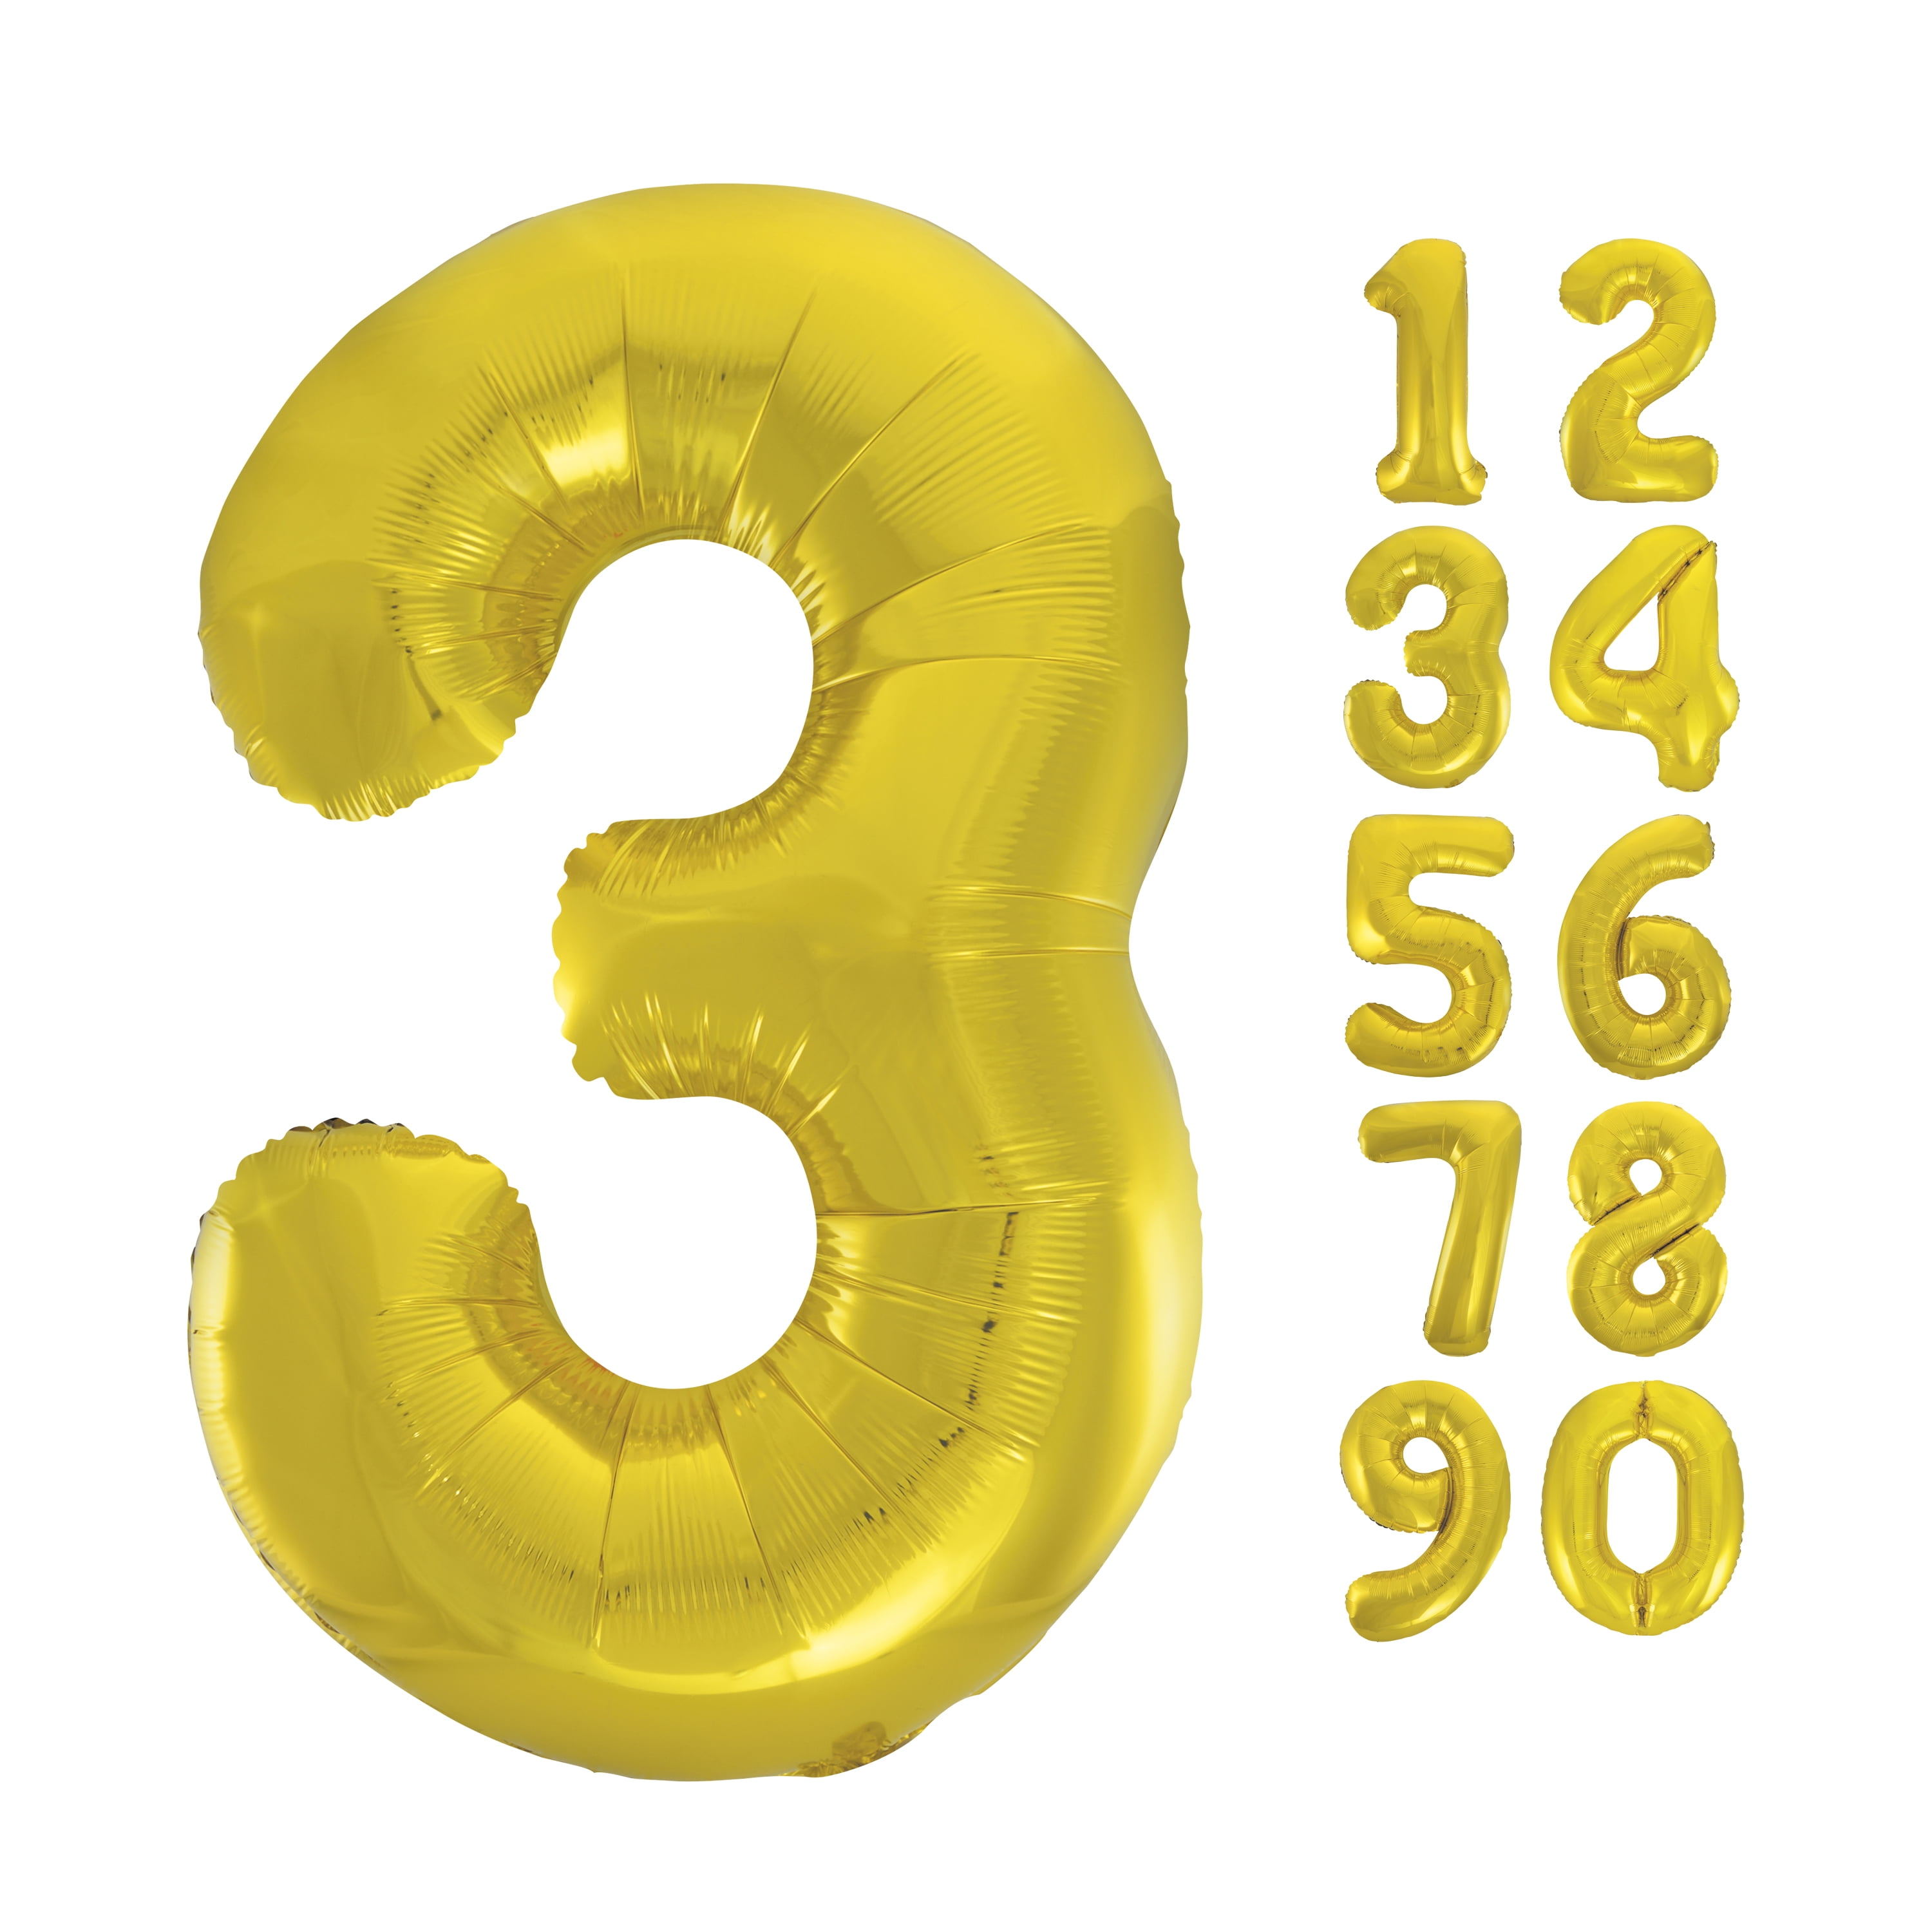 Birthday Balloons Customer Number Balloon 34 Giant Gold Number Foil Balloon Gold Party Decoration